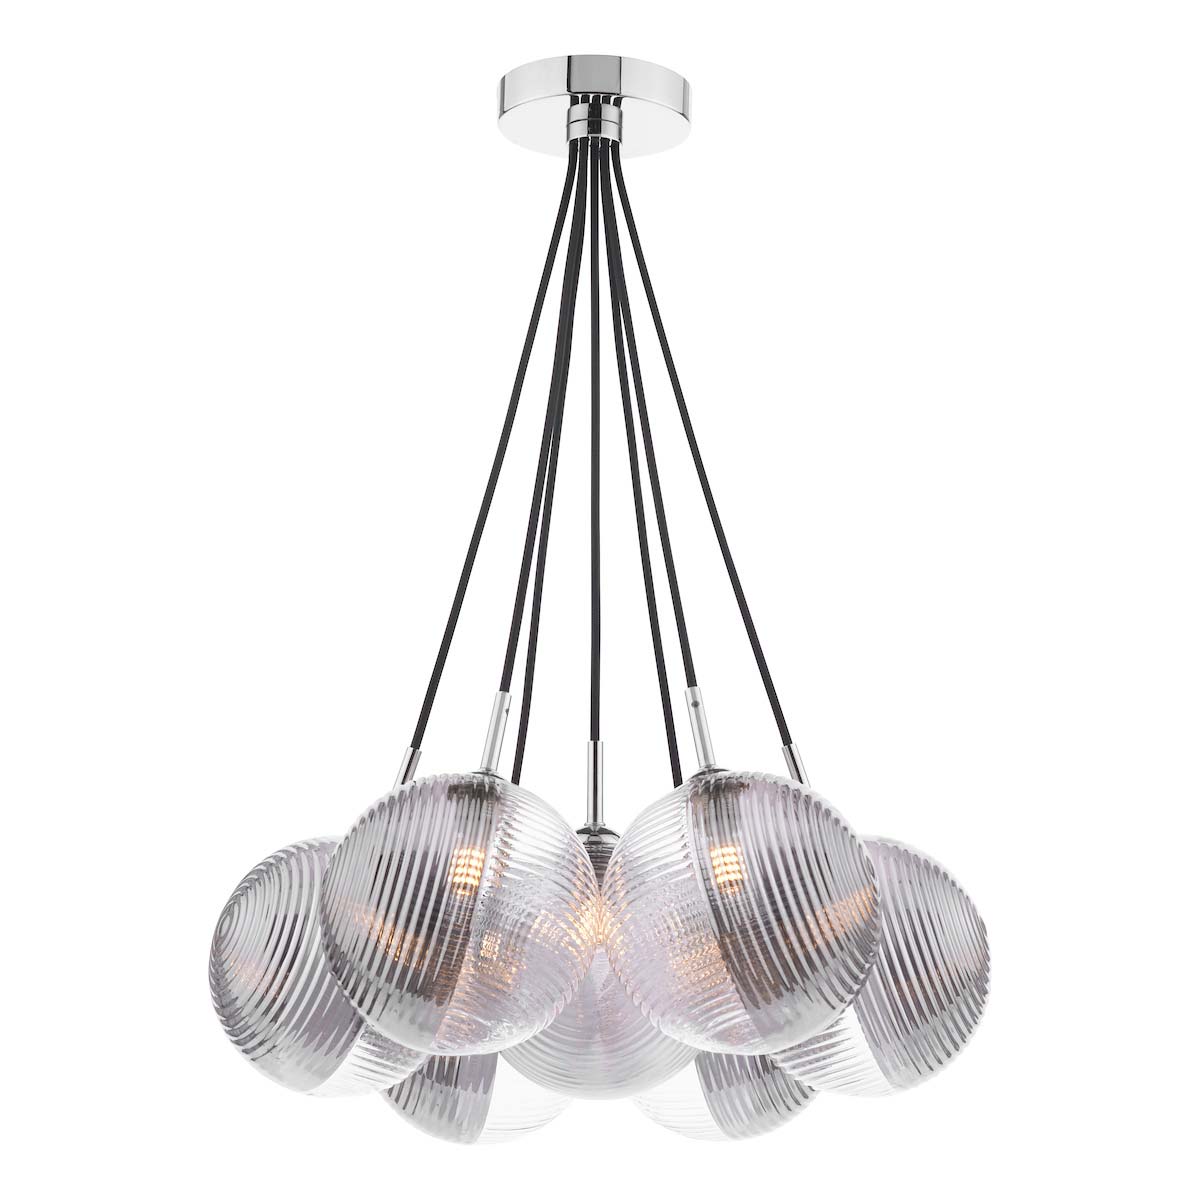 Dar Elpis 7 Light Cluster Pendant Smoked / Clear Ribbed Glass